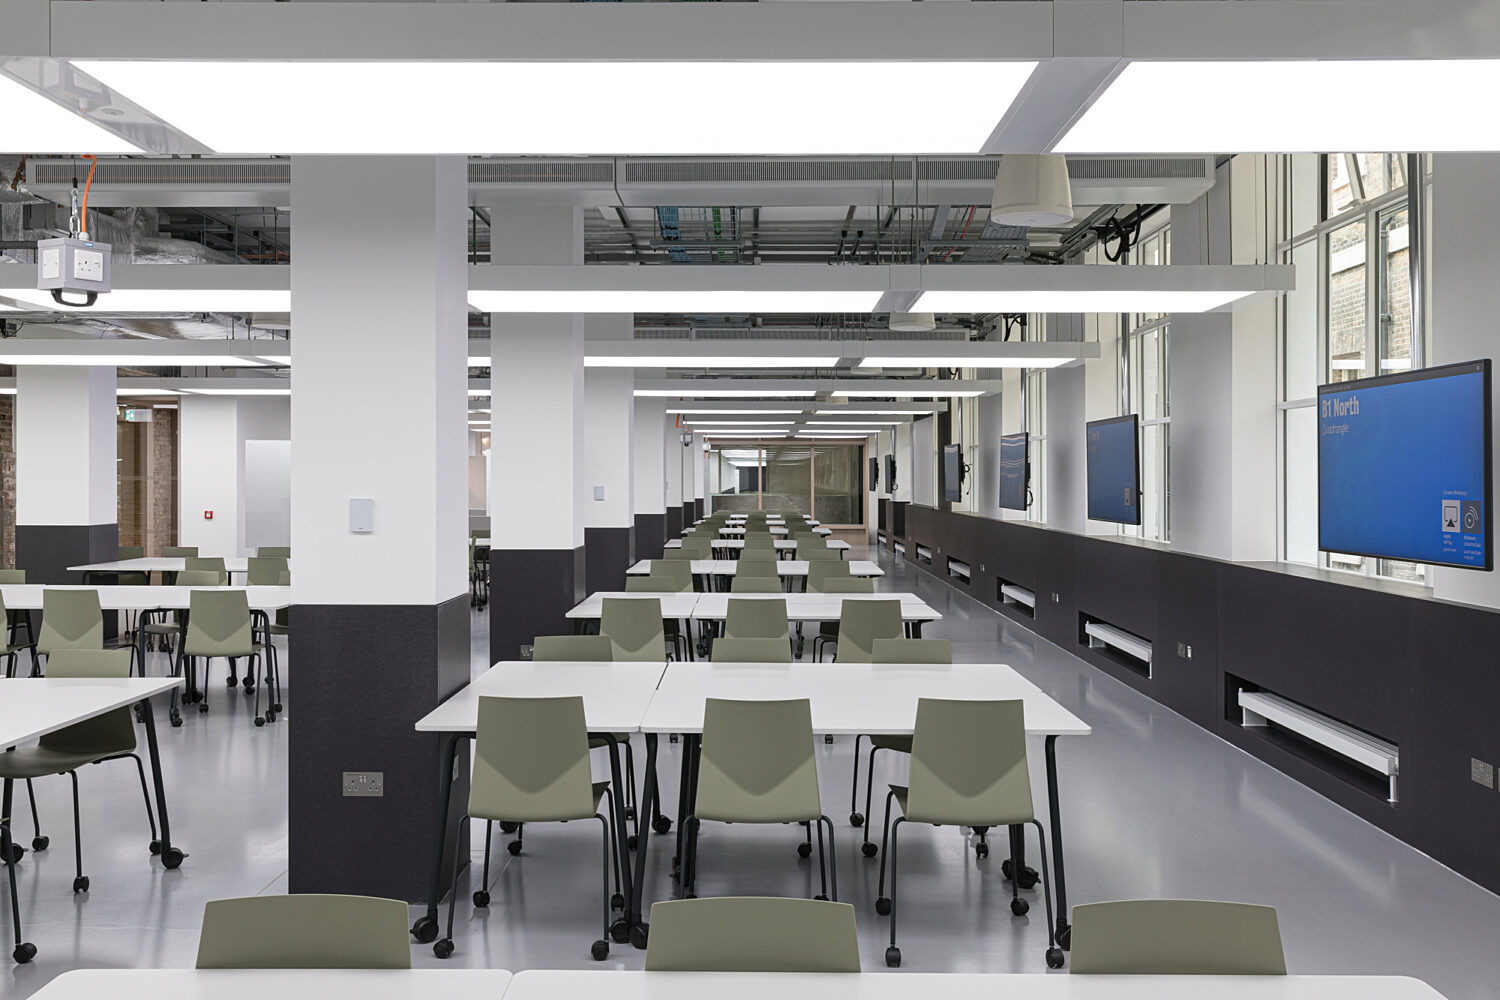 Flexible classroom space at KCL